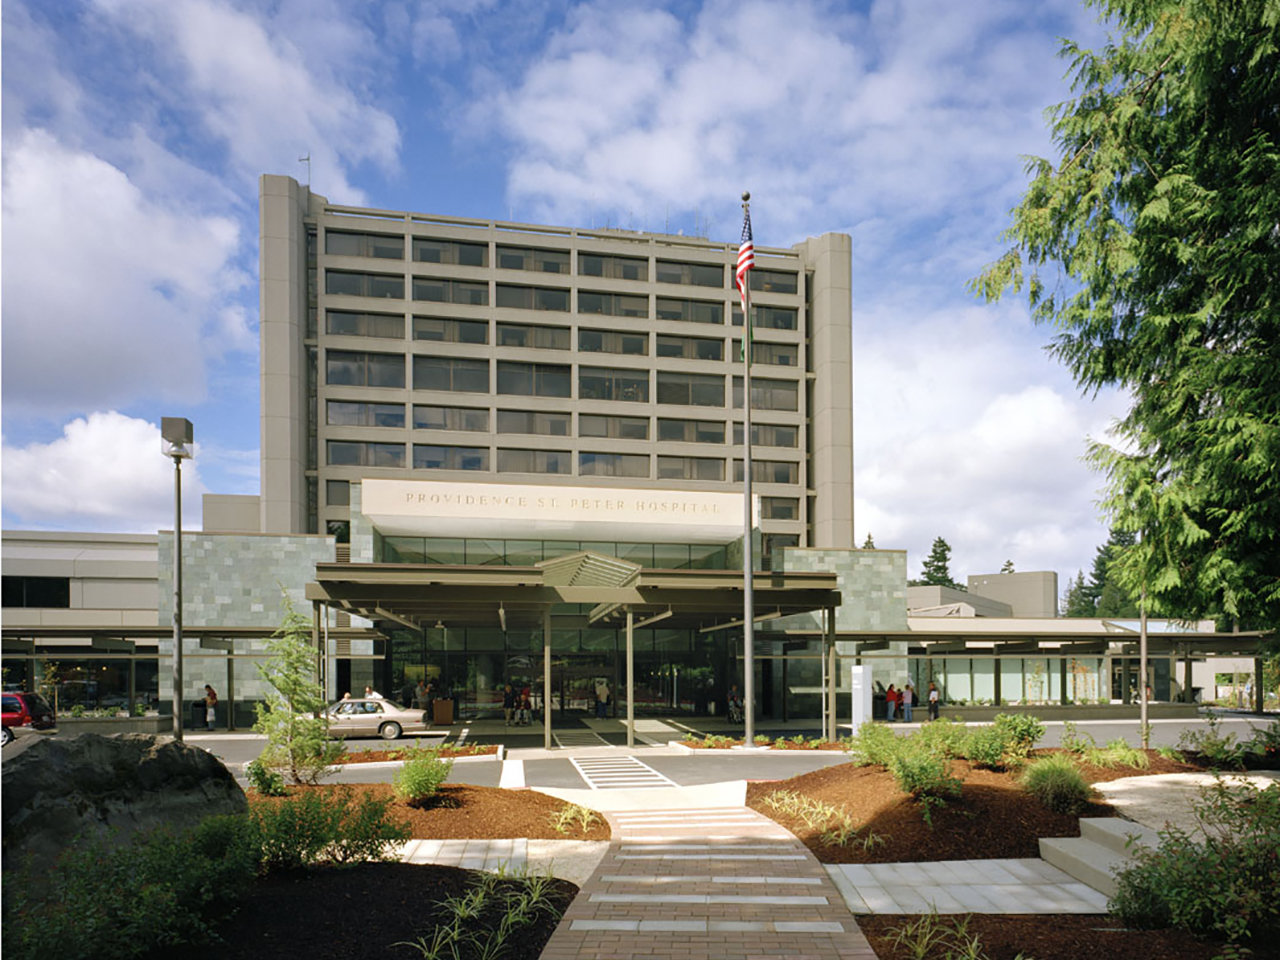 This image is of the front of Providence St. Peter Hospital in Olympia, which was named the top health facility in the region for the year 2021-2022 by U.S. News & World Report.